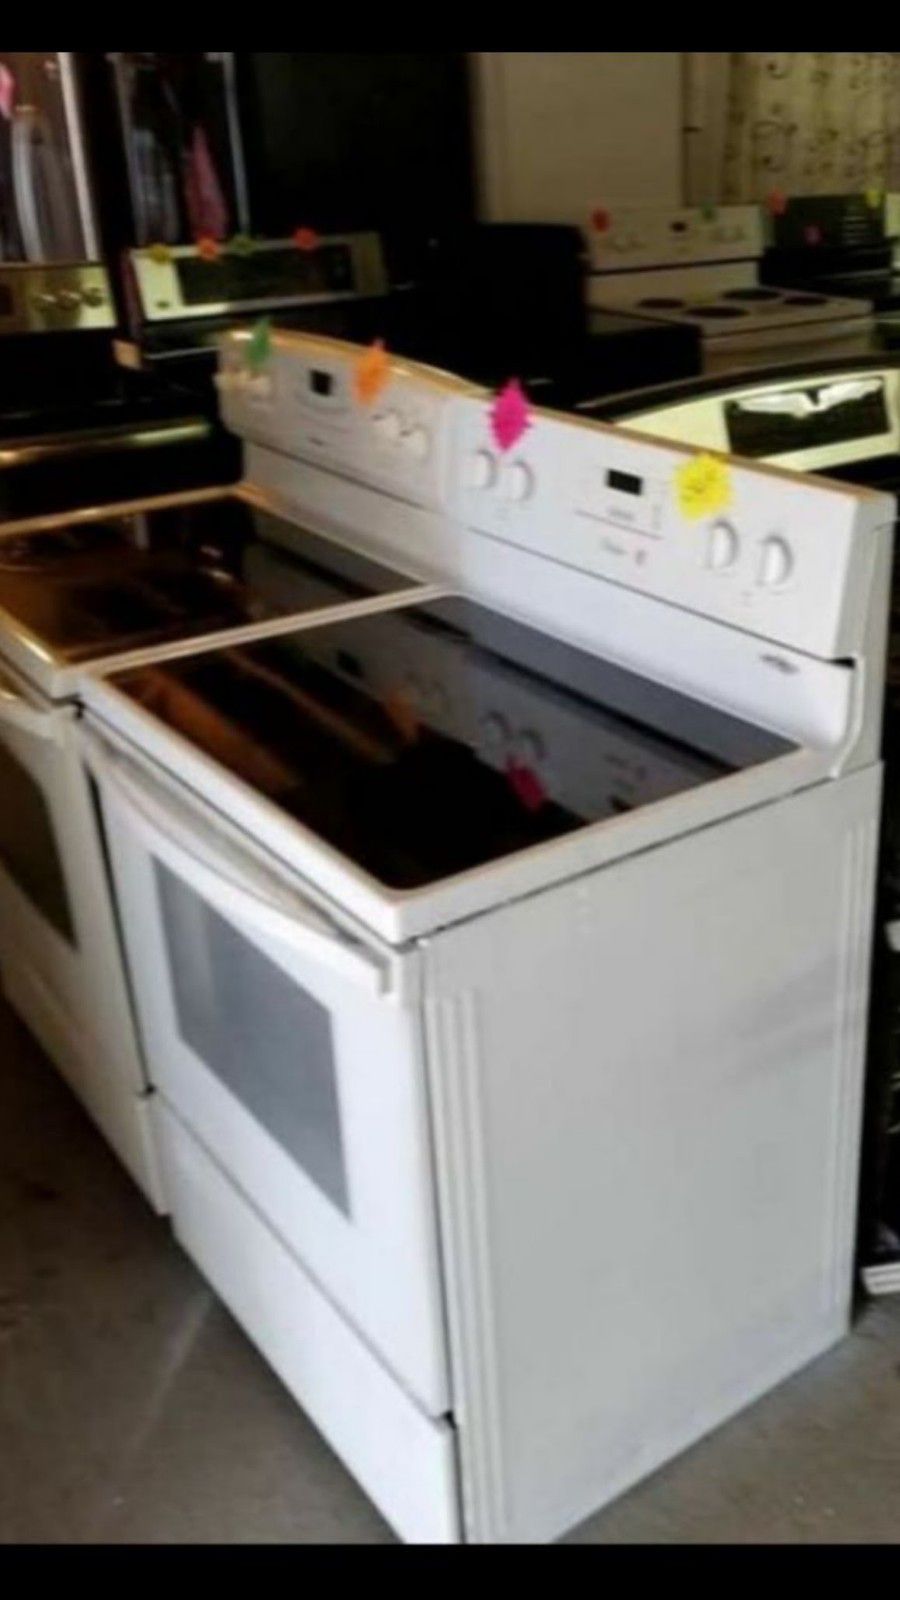 🌻🌸HUGE SALE. REFRIGERATOR*WASHER*DRYER*STOVE' *DISWASHER.90 DAY WARRANTY DELIVERY AVAILABLE+FINACIAL . PAY AS CASH 90 DAY🌻